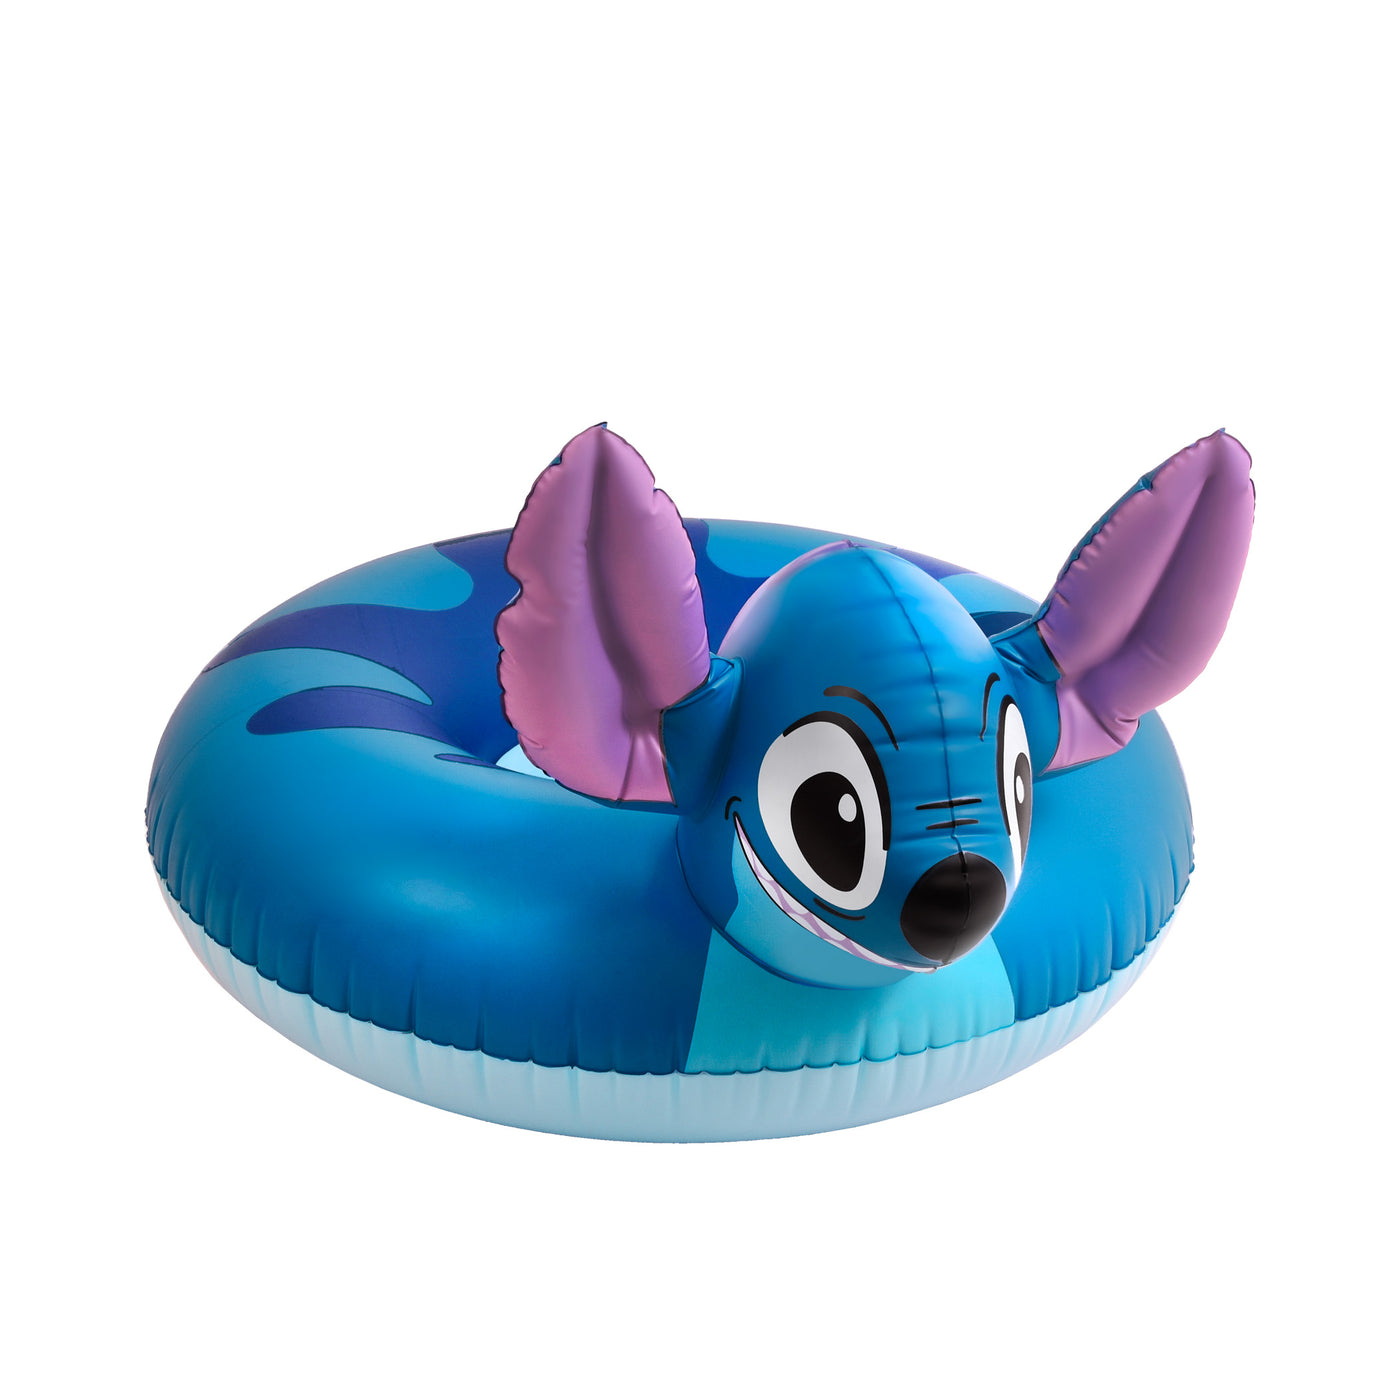 Stitch Day Fun Continues with Incredible Products from Disney